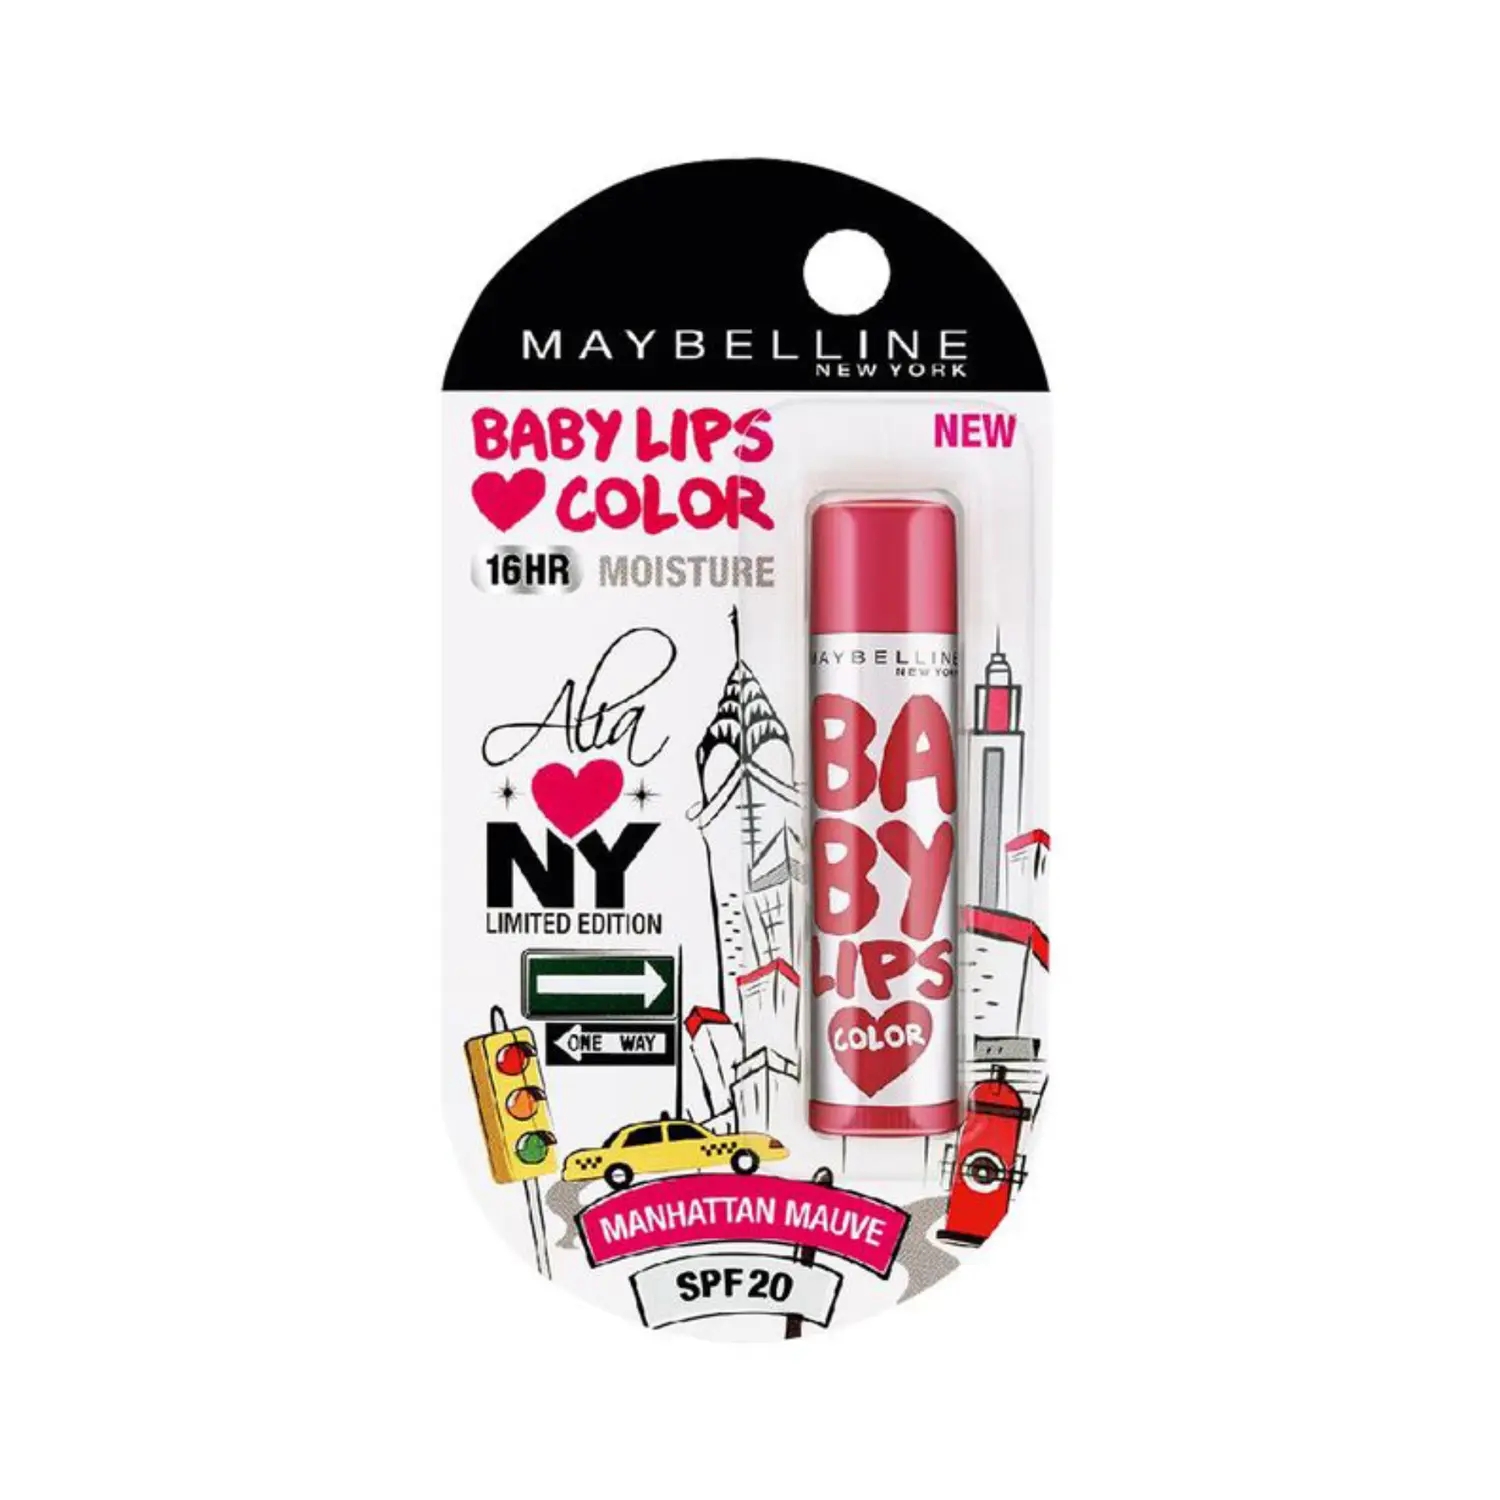 Maybelline New York | Maybelline New York Baby Lips Colour Limited Edition Lip Balm - Manhattan Mauve (4g)